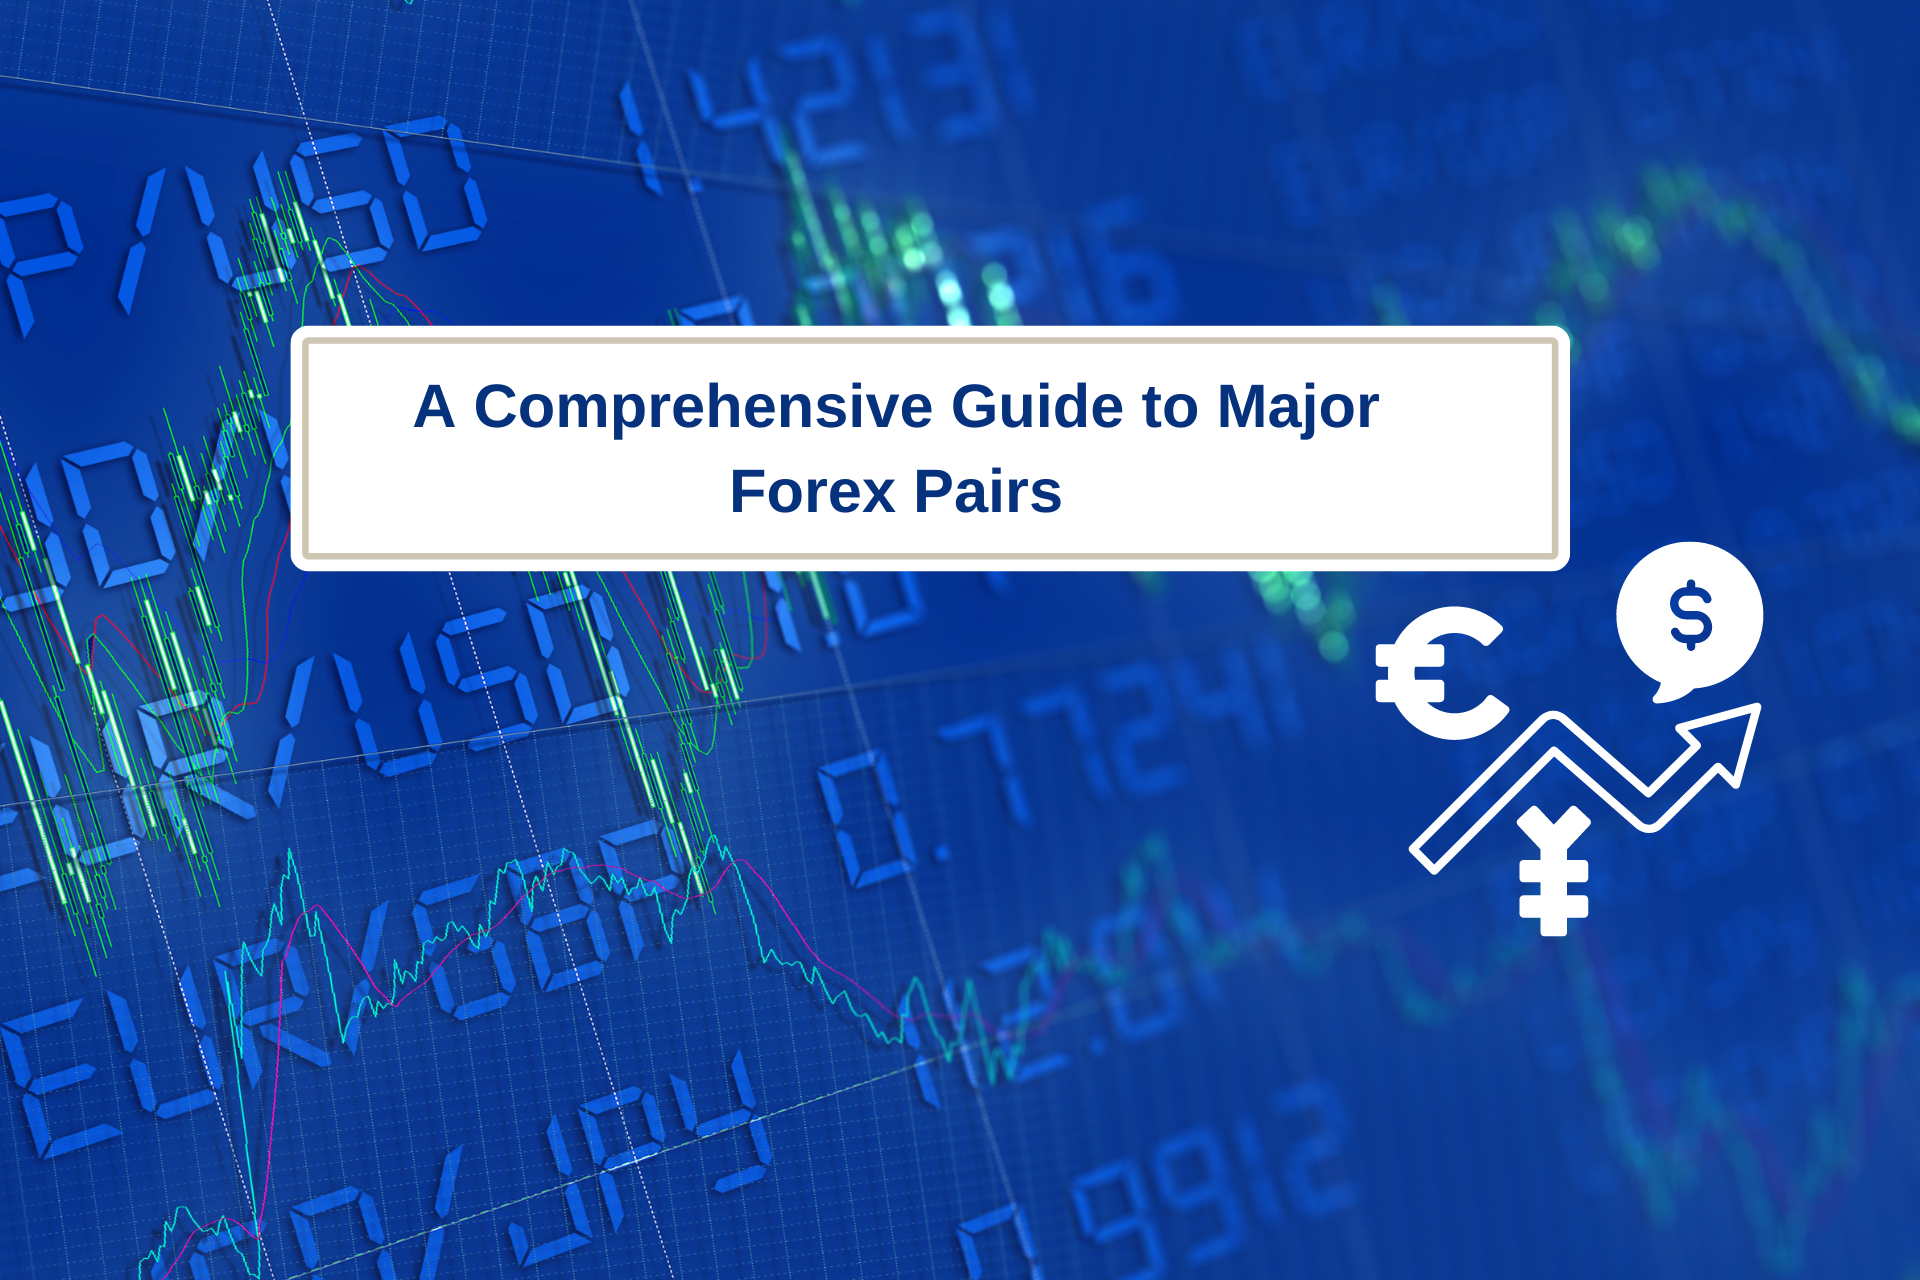 A Comprehensive Guide to Major Forex Pairs